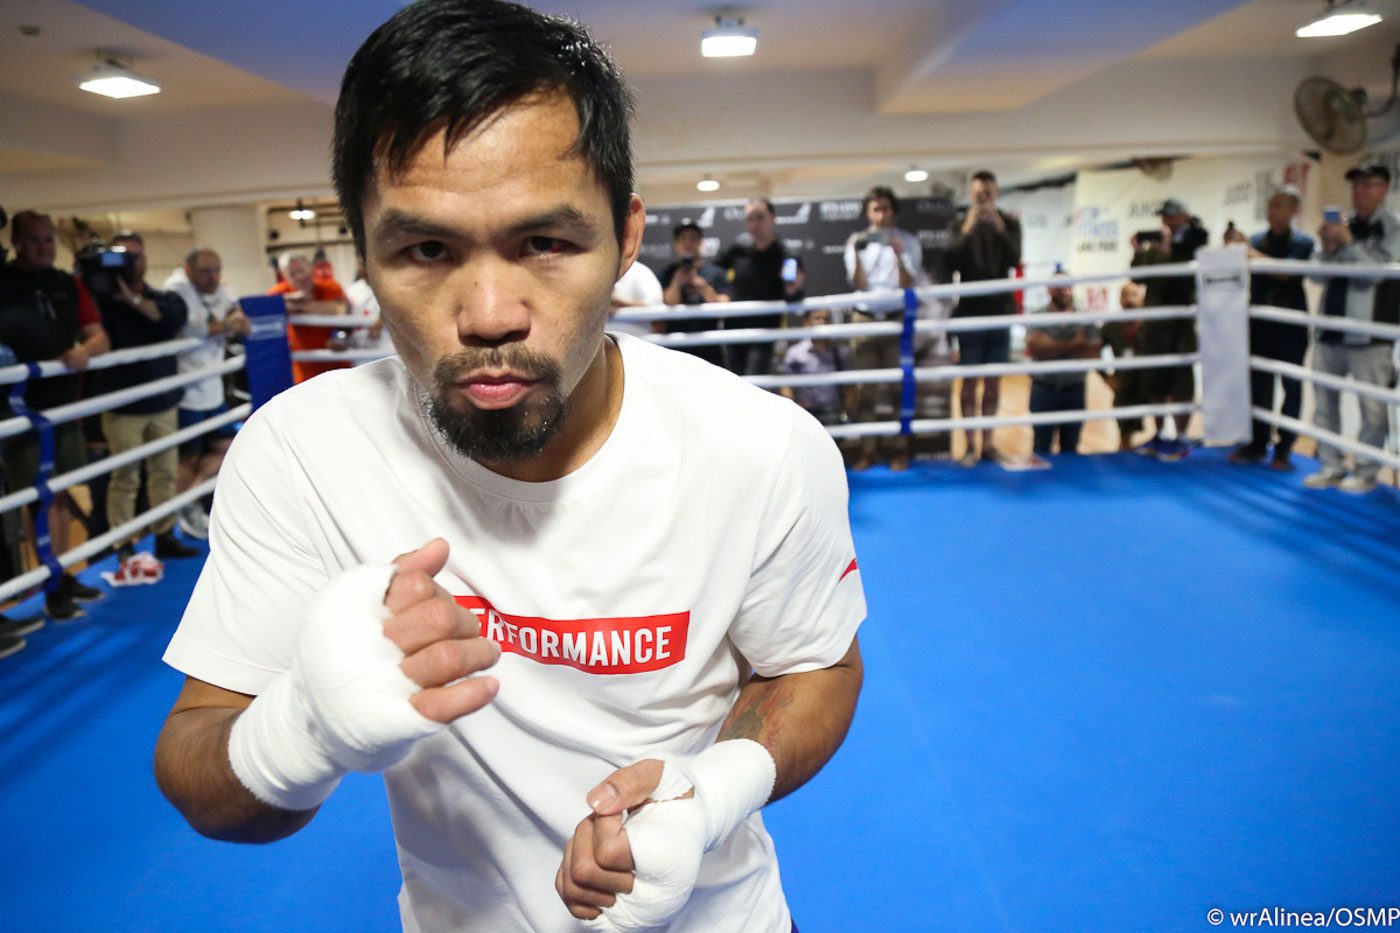 Rumors of Pacquiao’s decline greatly exaggerated